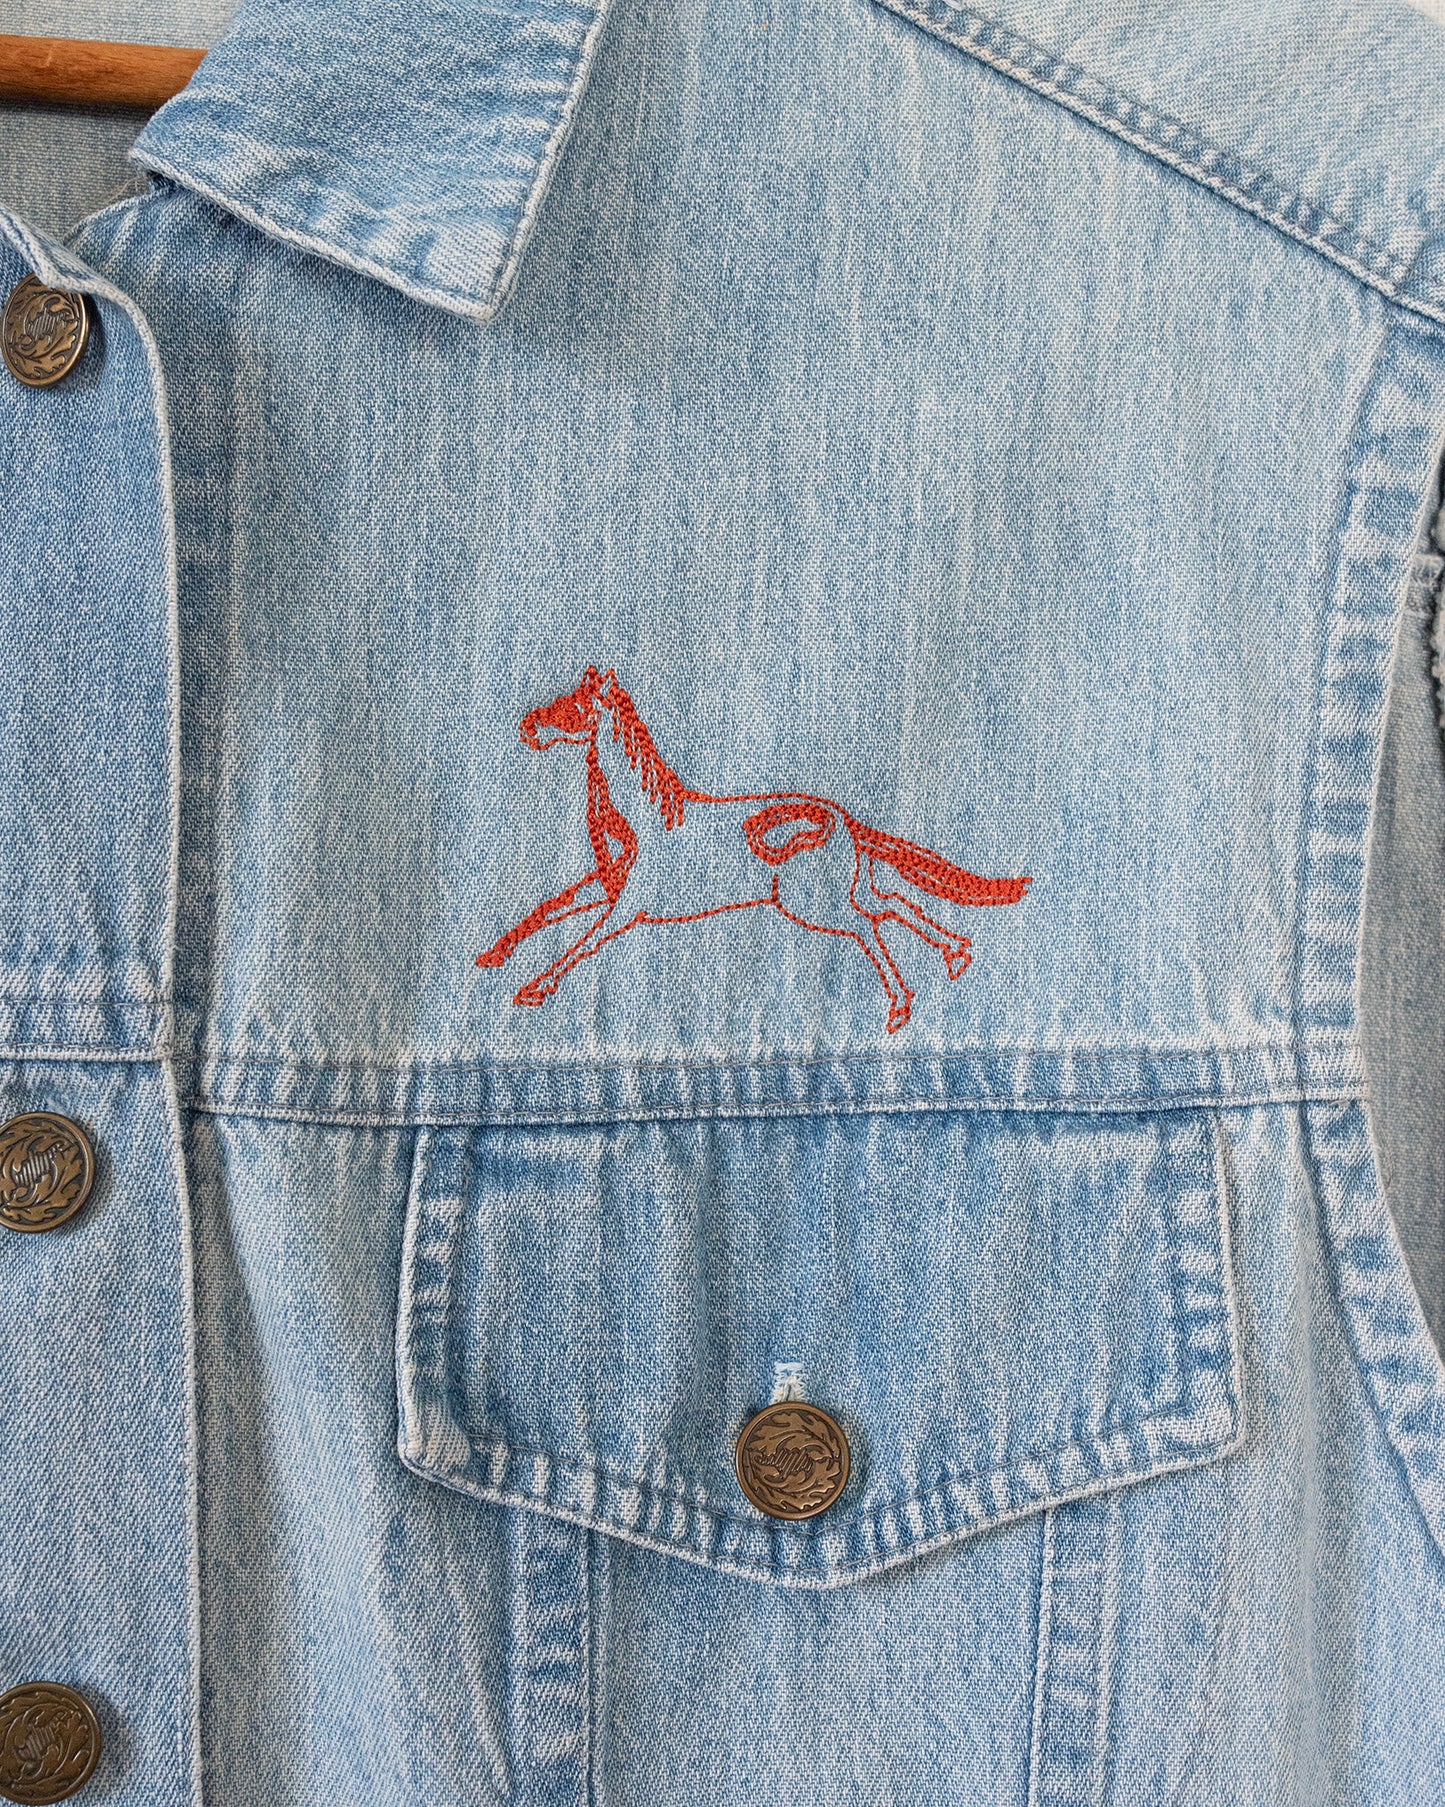 L/XL ~ PAINTED HORSE, TAKE IT EASY & MAMA TRIED